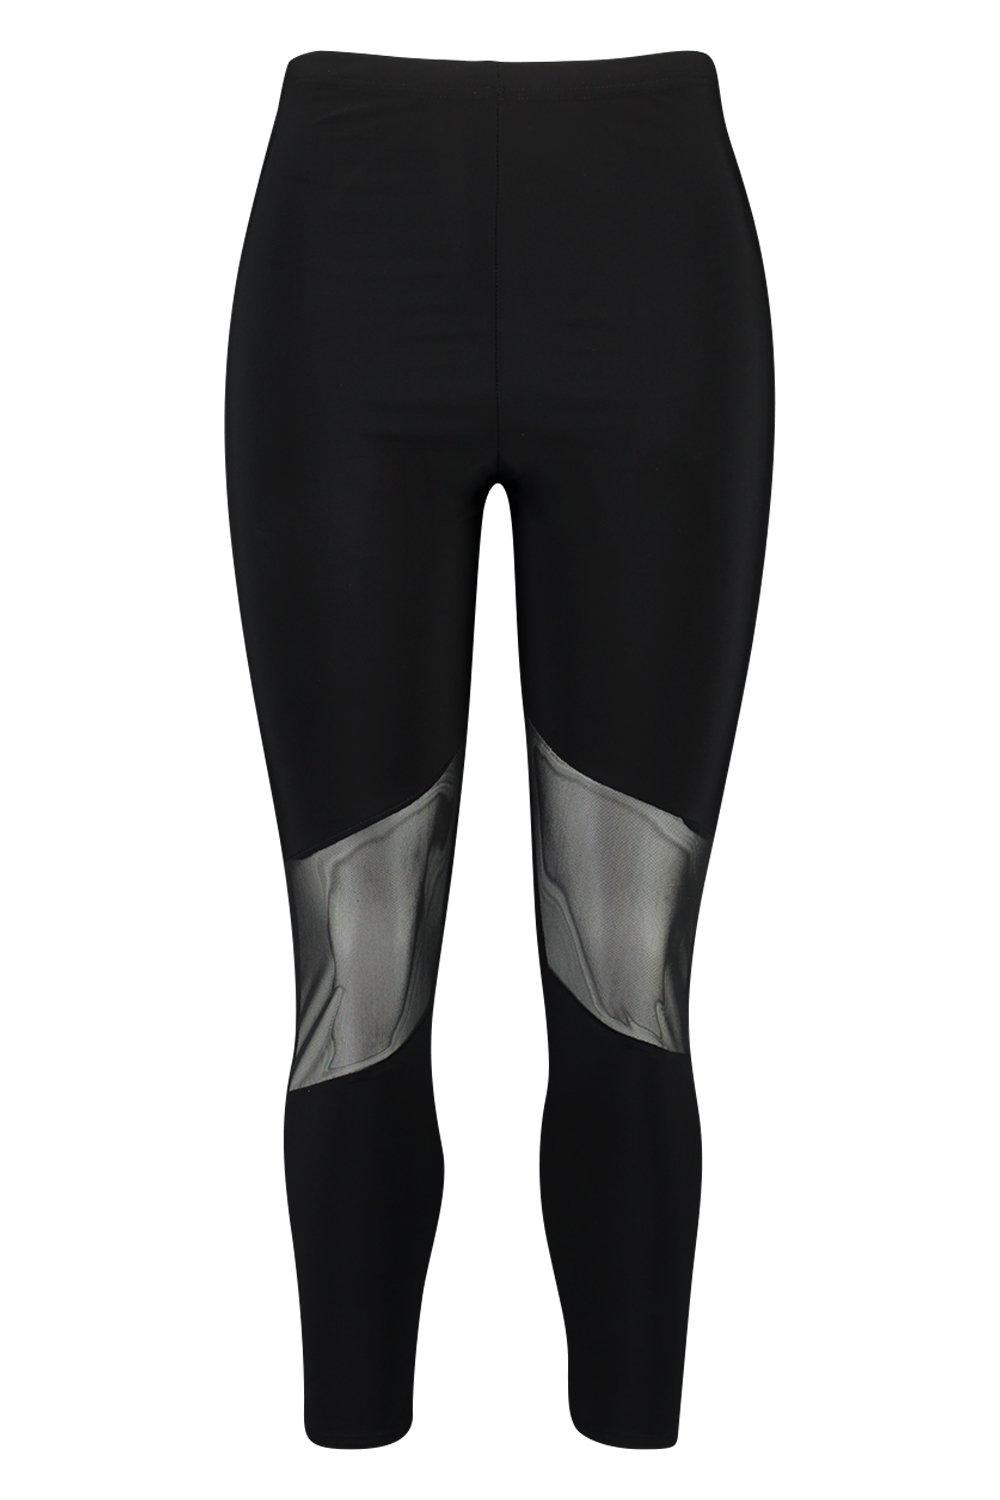 Women's Athletic Leggings with Mesh and Cross Cutouts - Plus Size